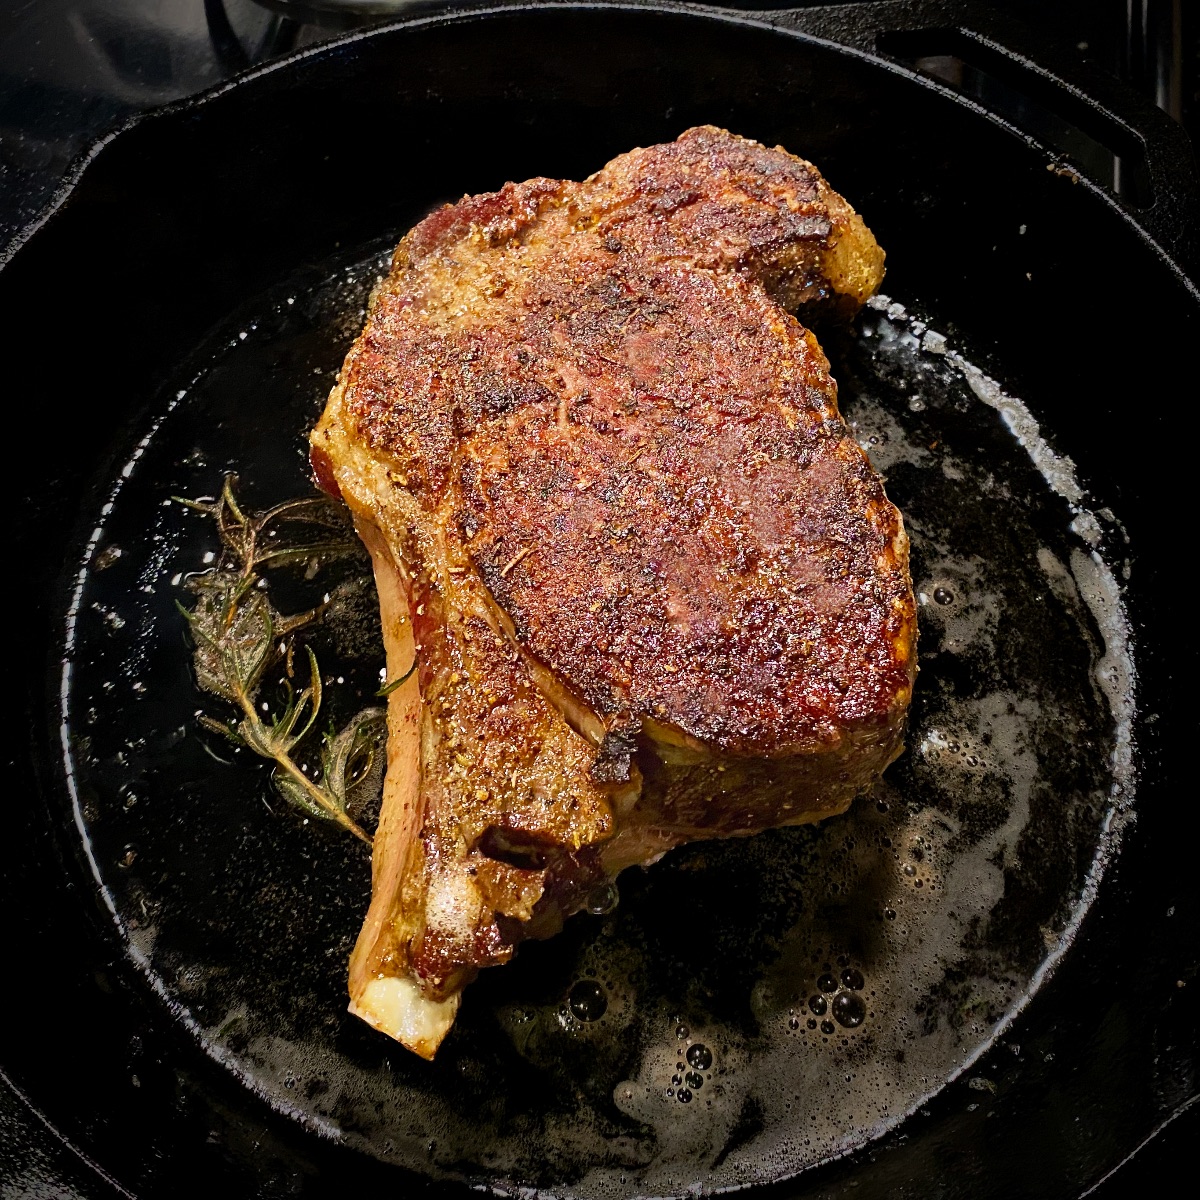 Perfectly reverse seared ribeye in a hot cast iron skillet